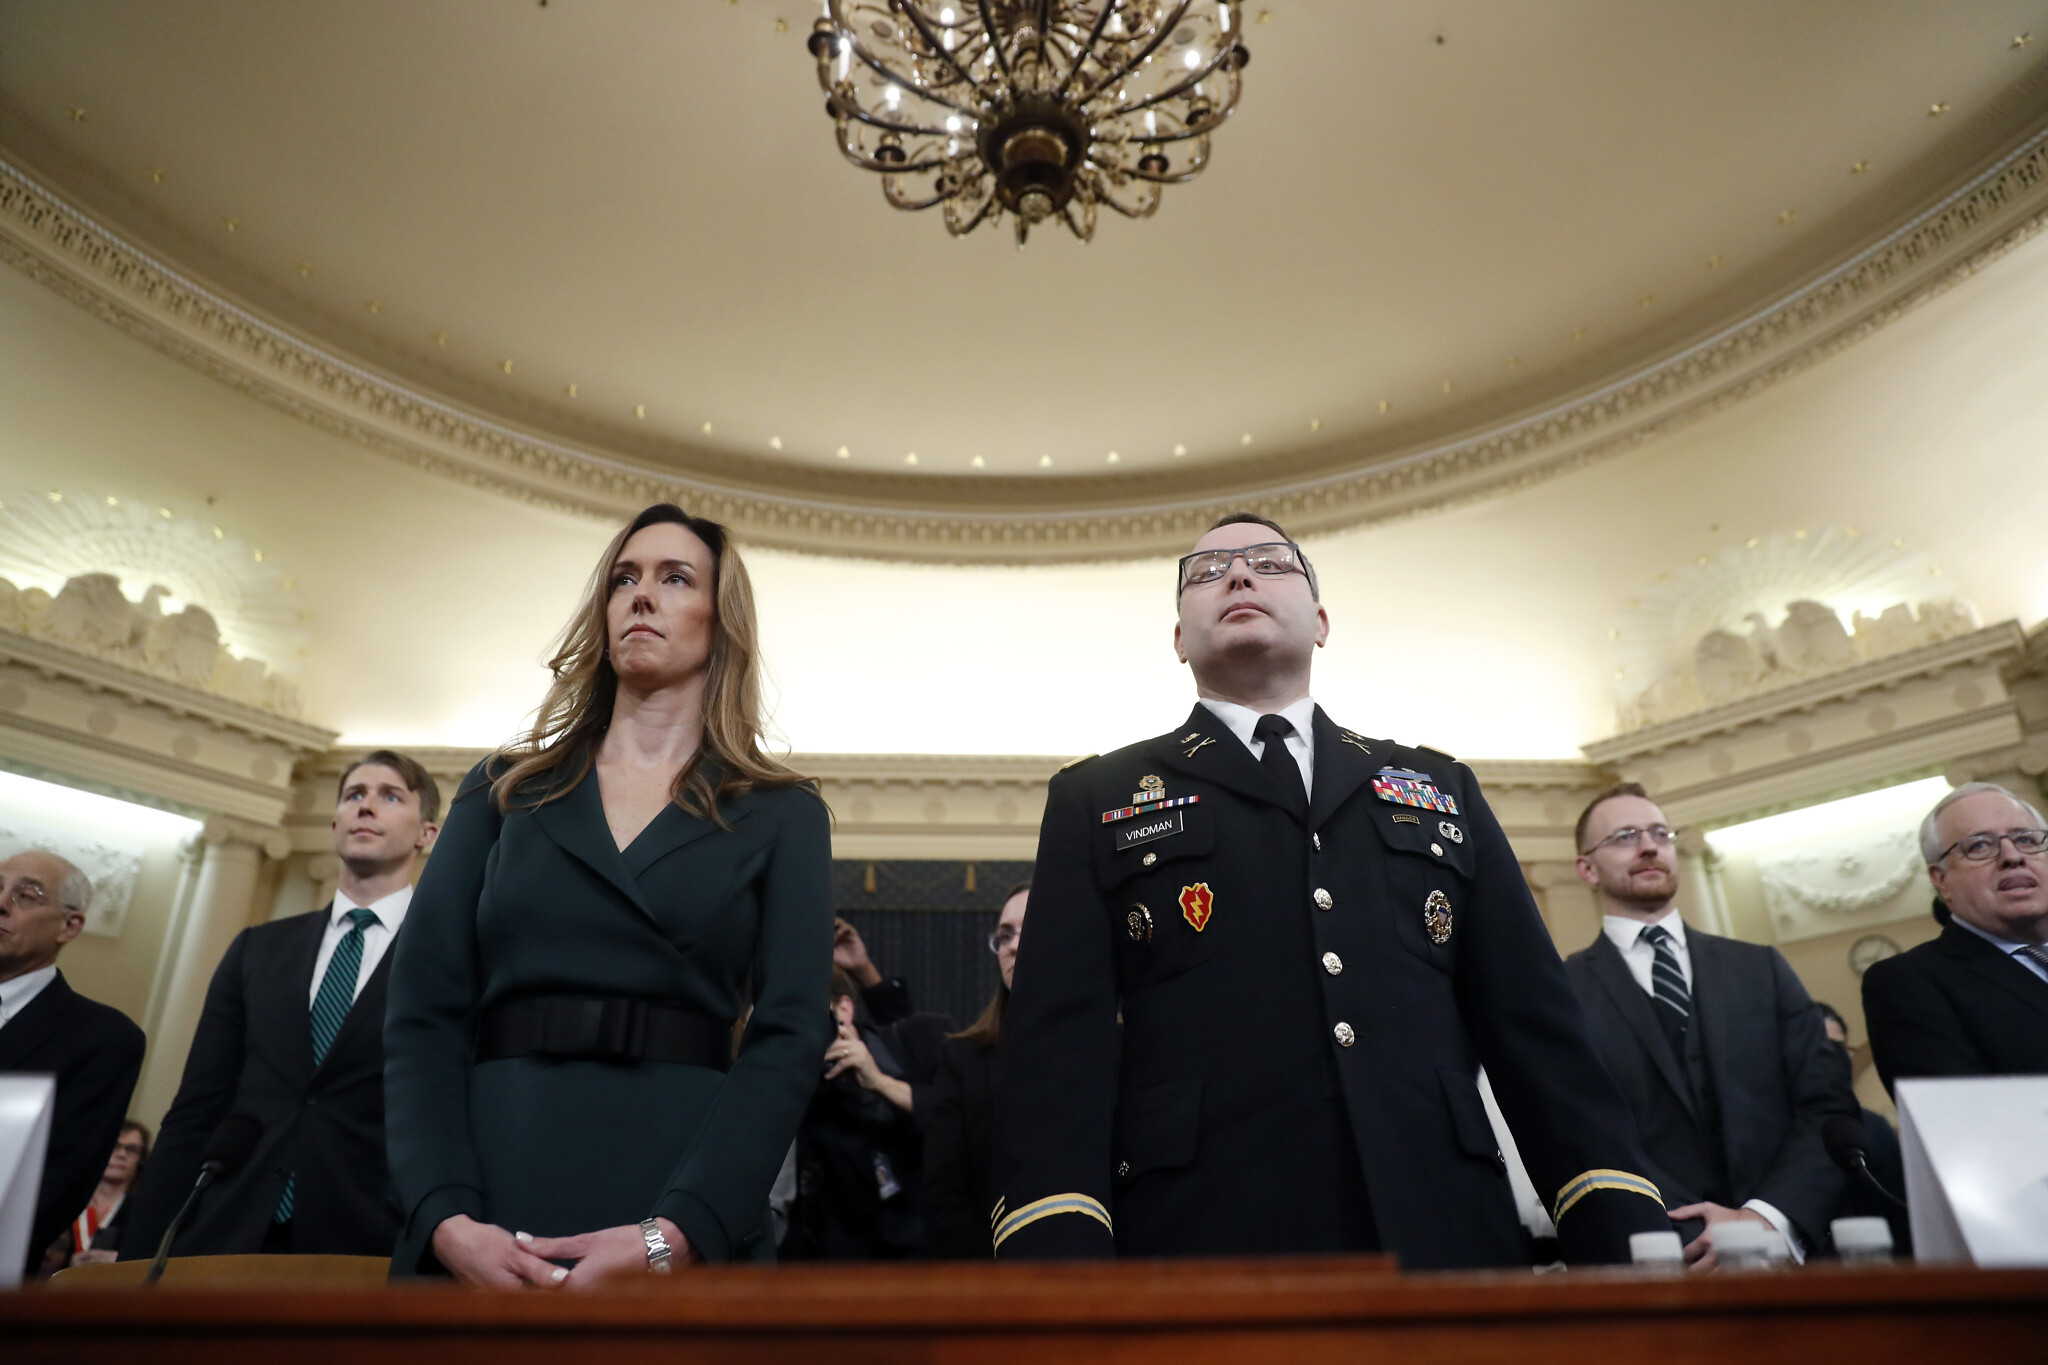 'I am an American,' medaled Jewish army officer reminds Trump allies in hearing | The ...2048 x 1365